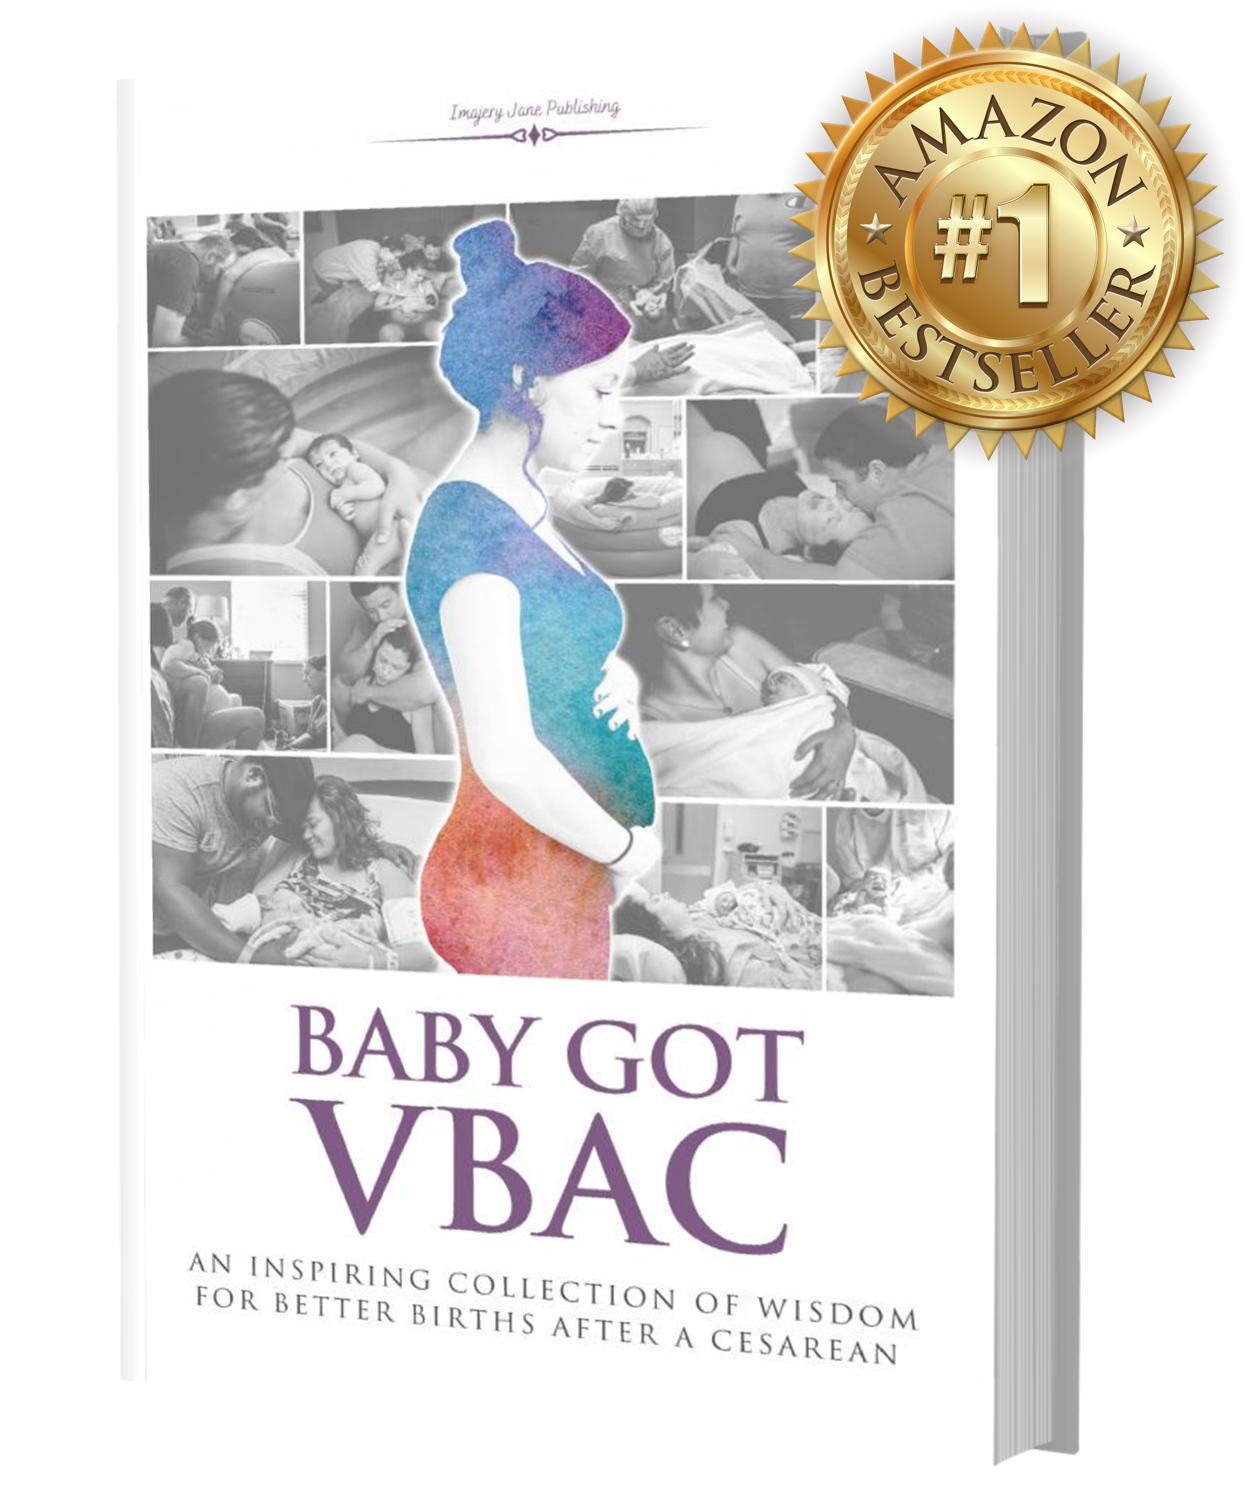 Baby Got VBAC Book on Amazon number one best seller